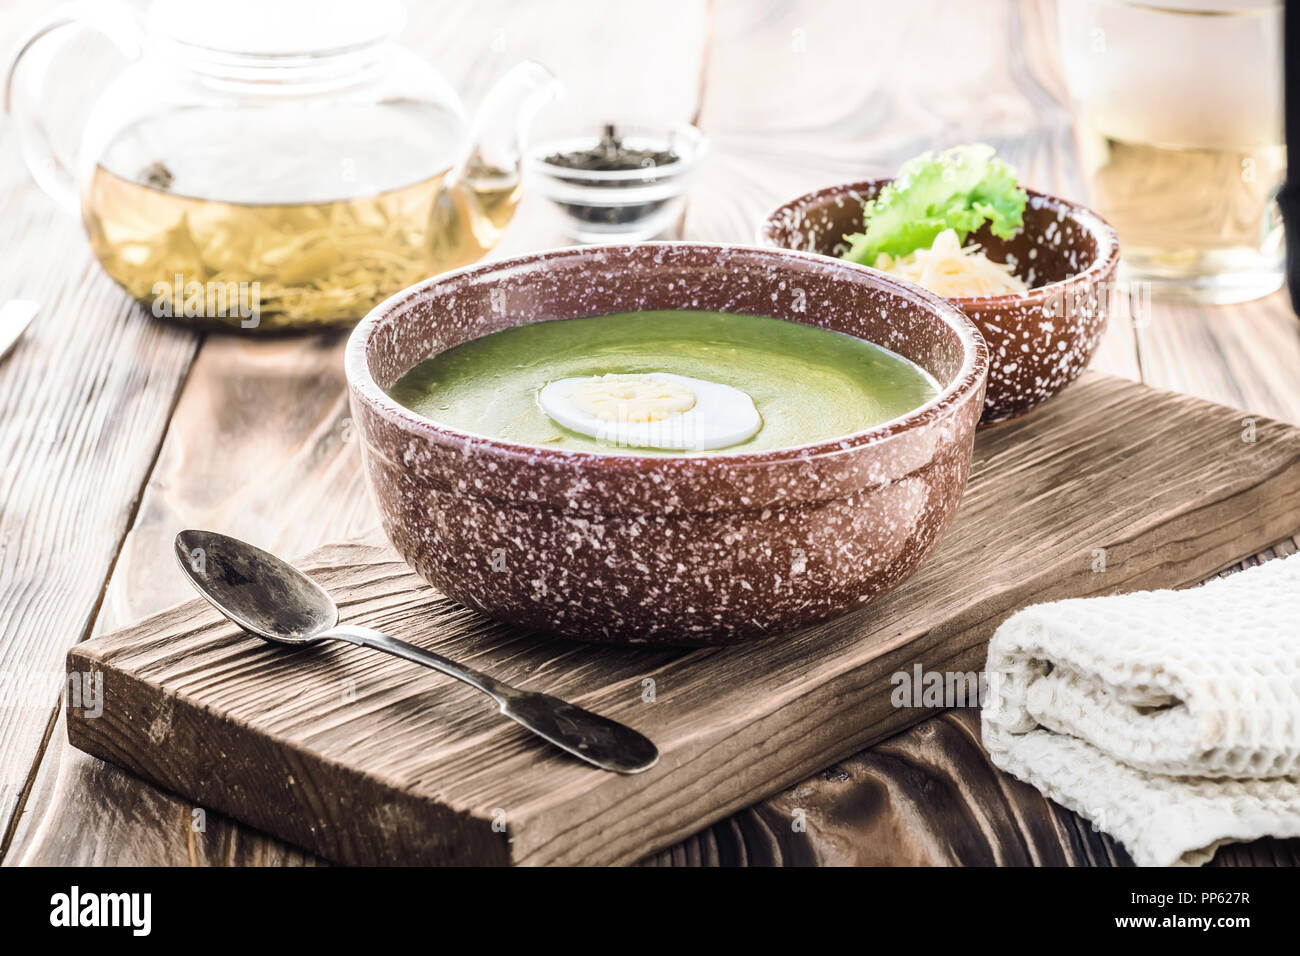 Puree cream soup of green leaf lettuce, spinach and cheese Stock Photo